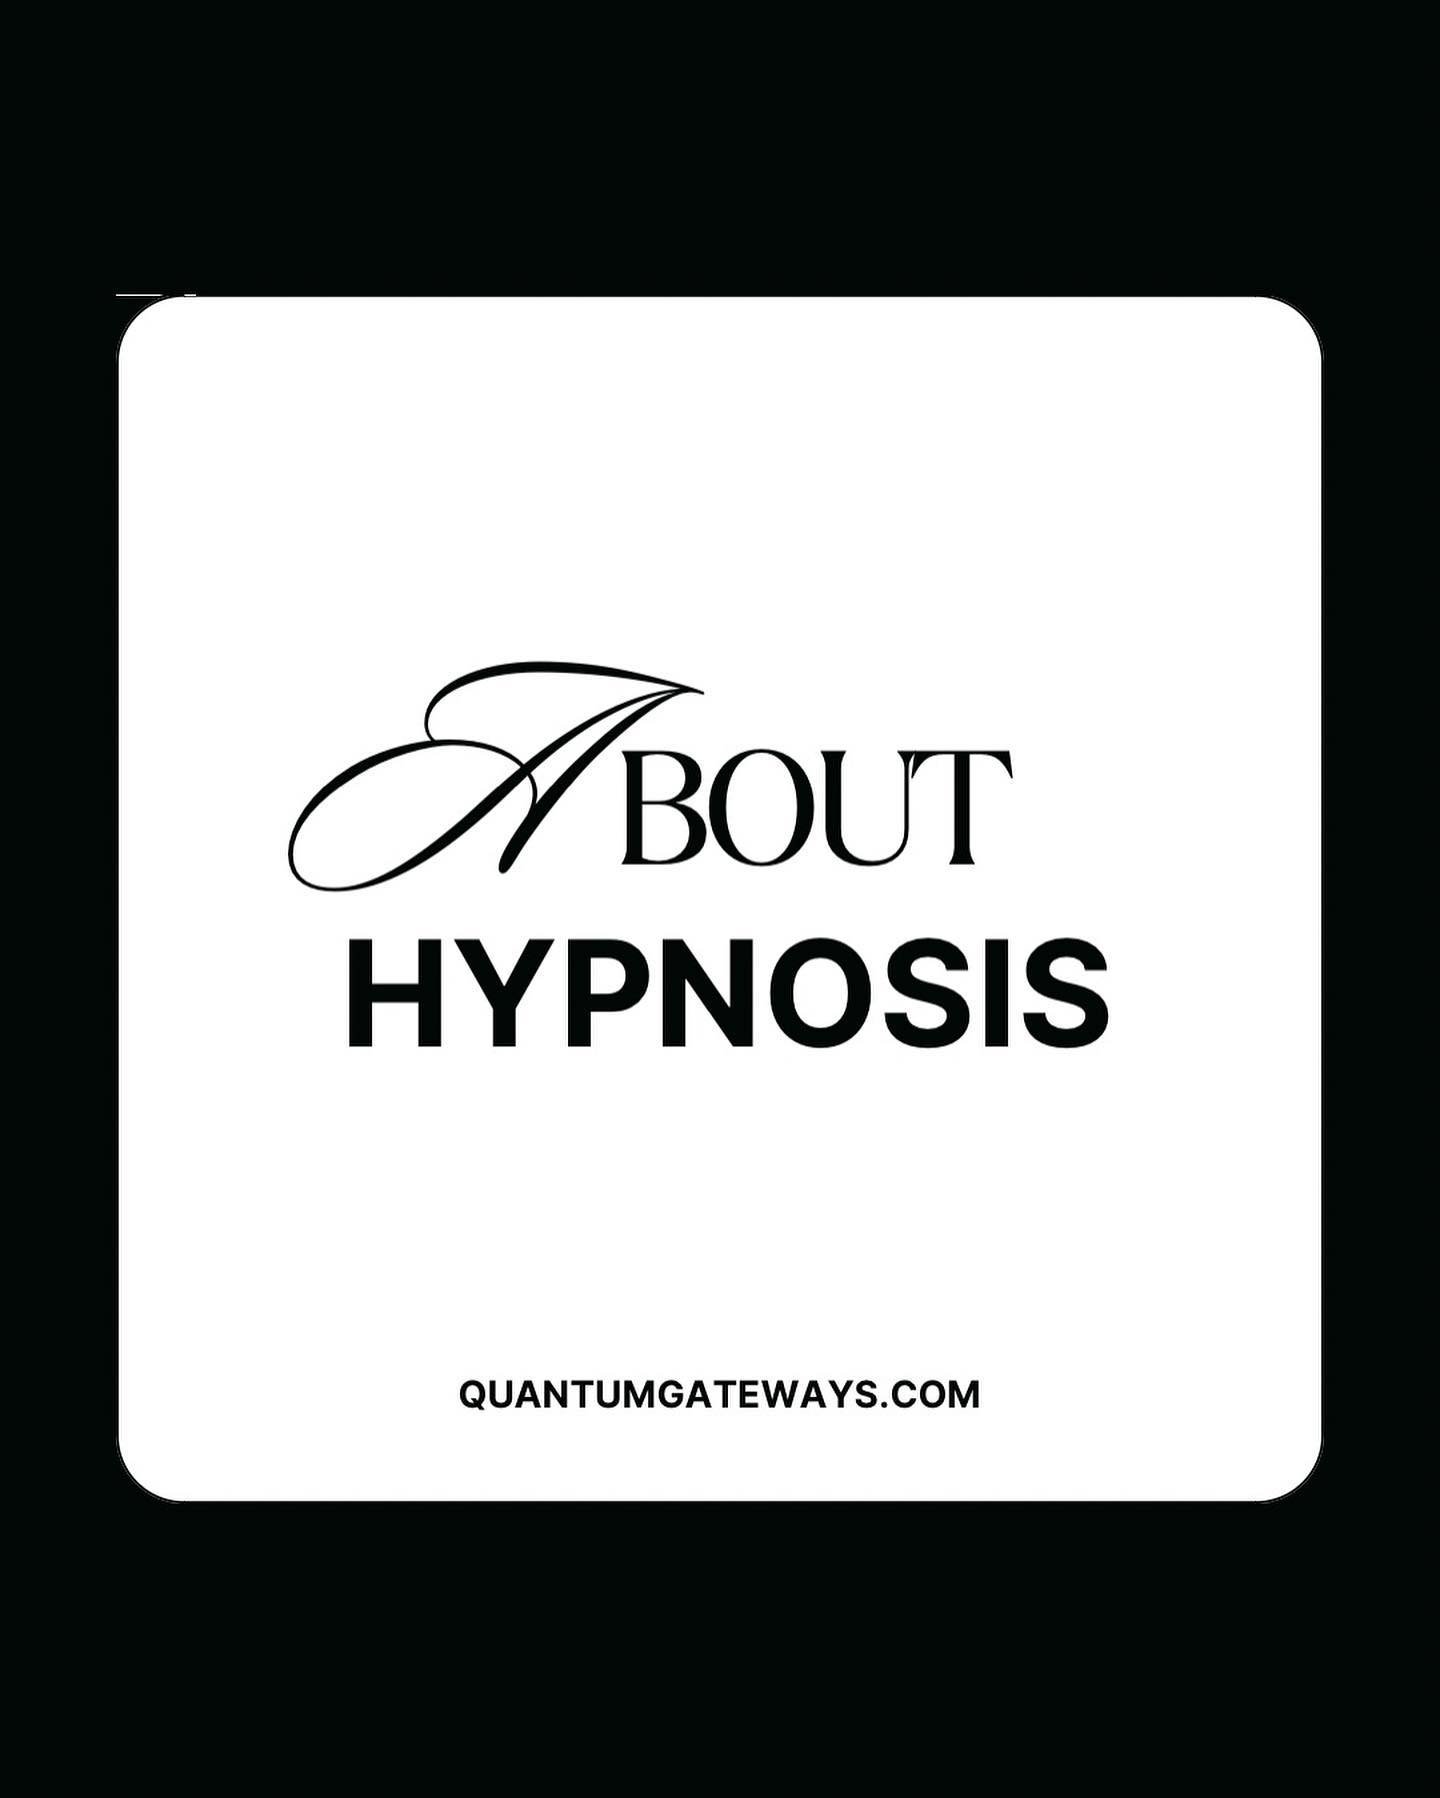 Hypnosis is a simple process that allows you to deeply relax, enabling access to the subconscious mind. The subconscious realm influences your beliefs, thoughts, feelings, and behaviors, which collectively shape 93-98% of your reality. Hypnosis also 